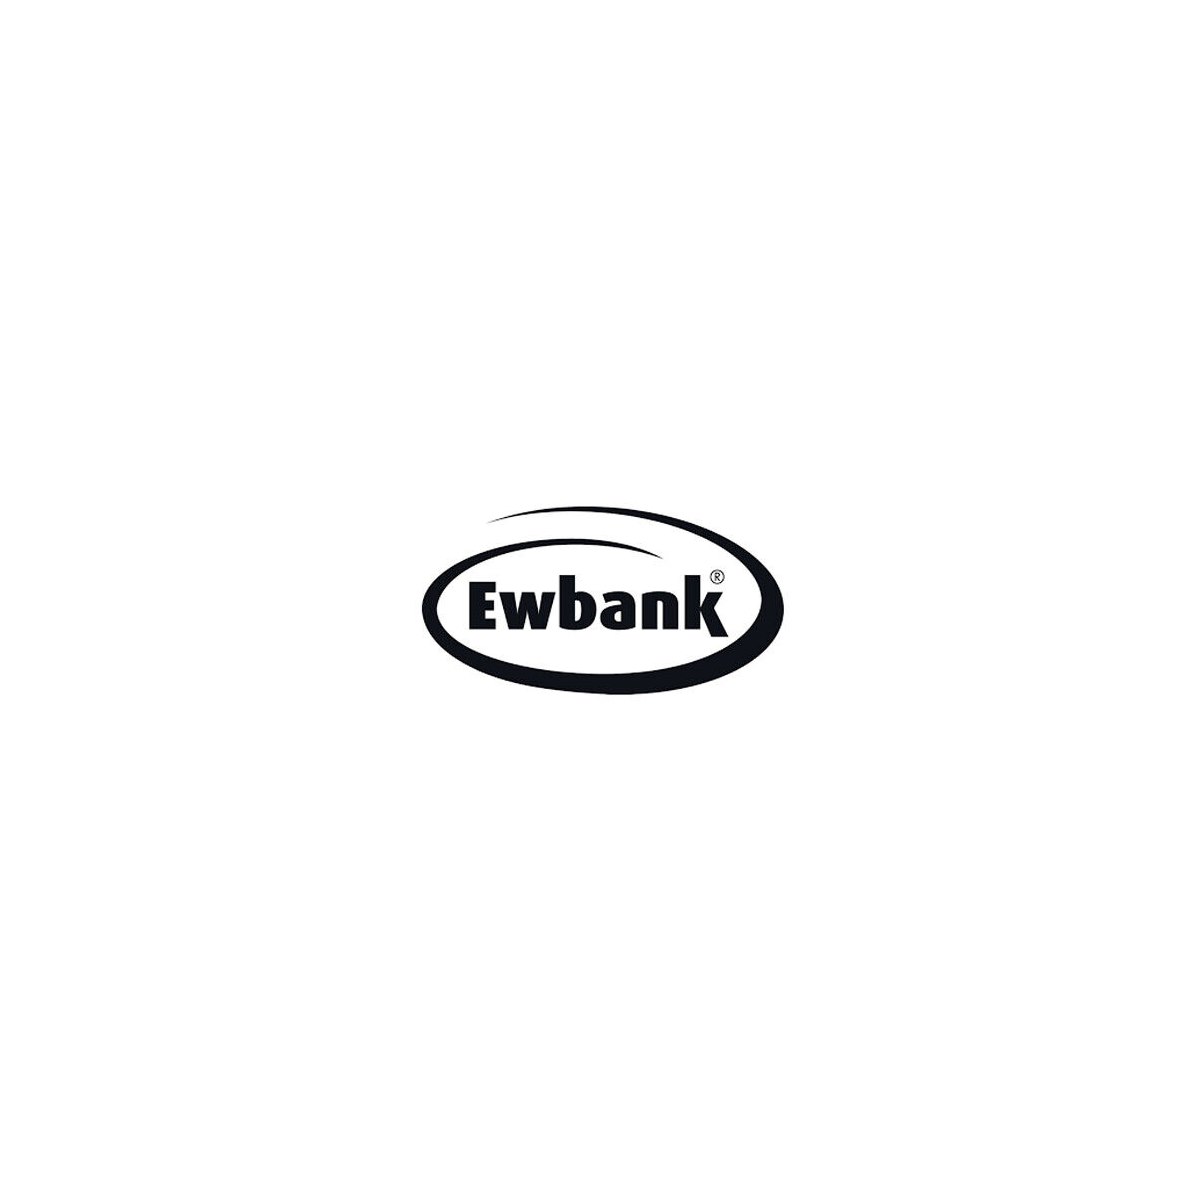 Where to Buy Ewbank Products